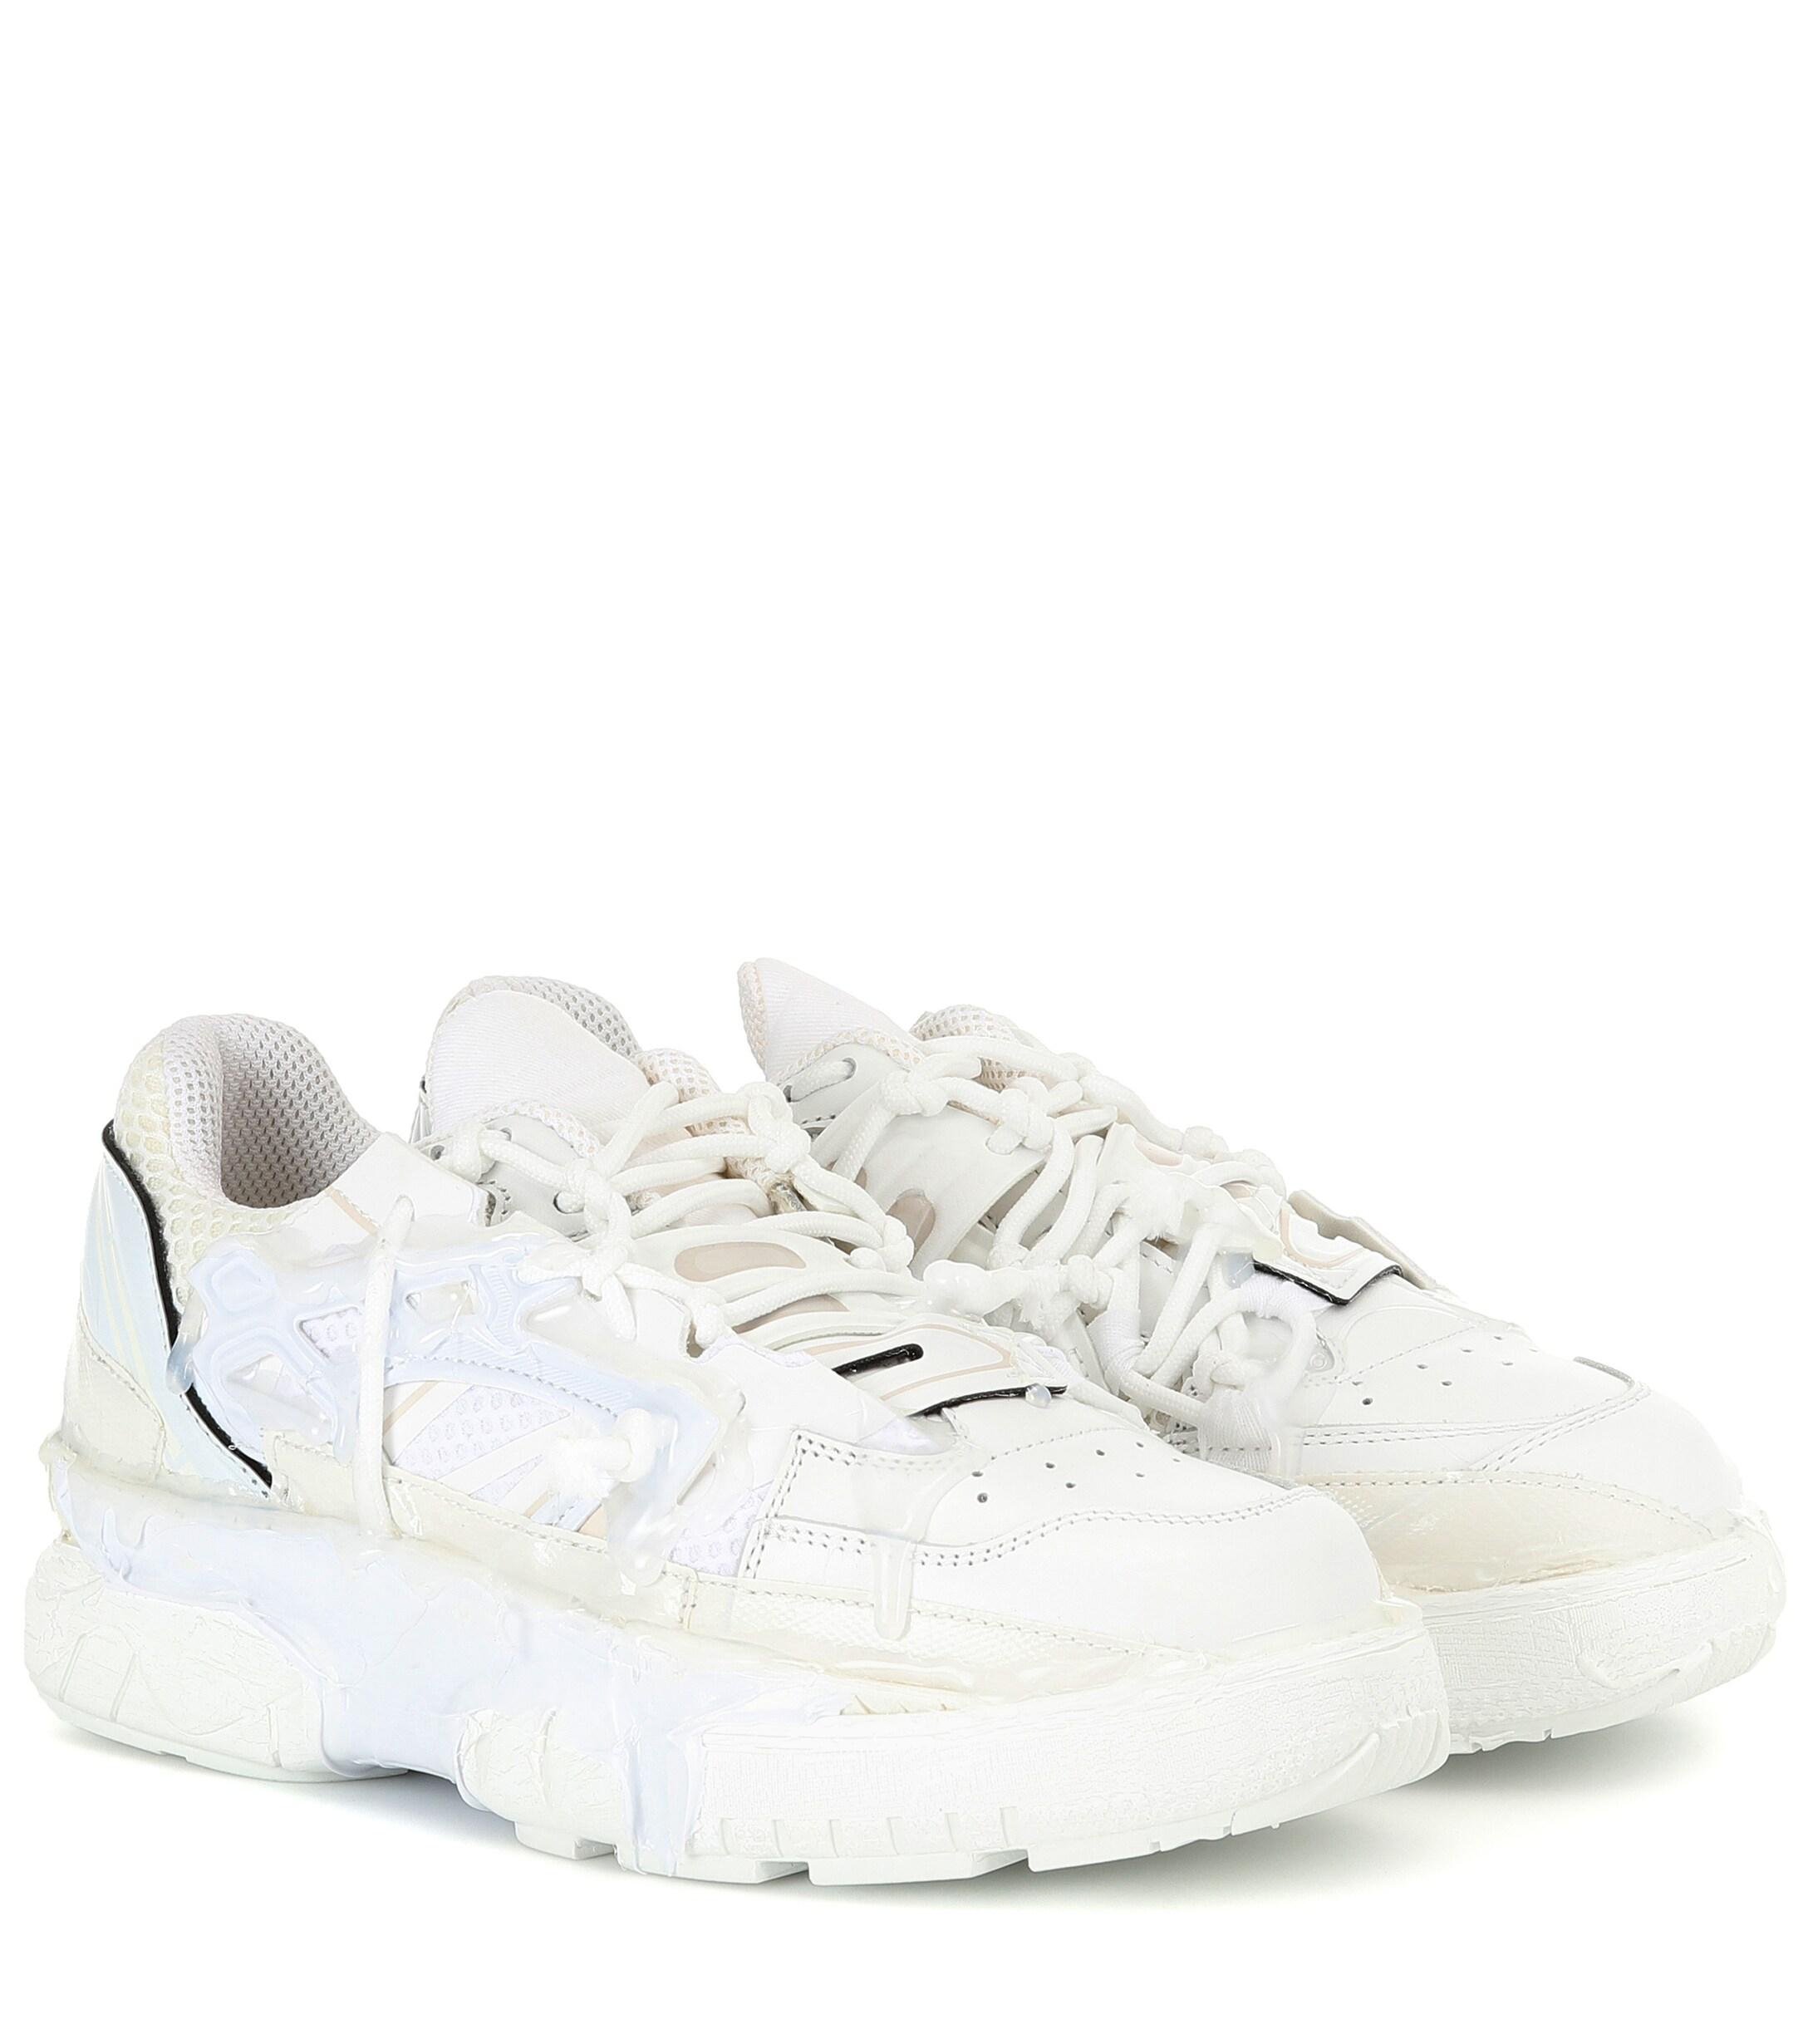 Maison Margiela Fusion Leather Sneakers in White - Lyst